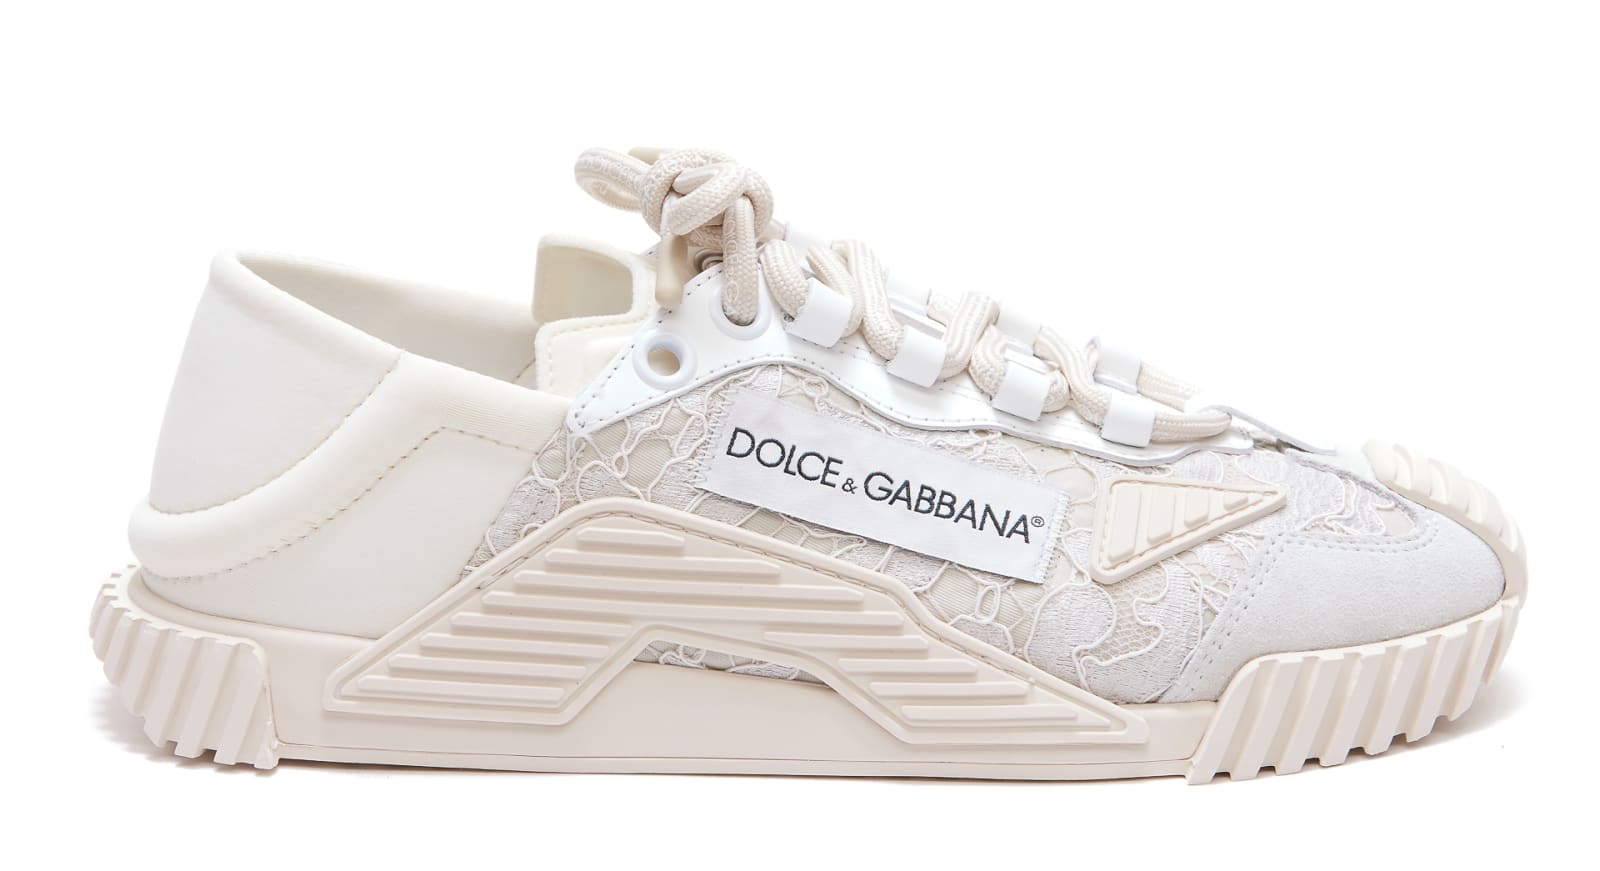 Dolce & Gabbana Ns1 Sneakers